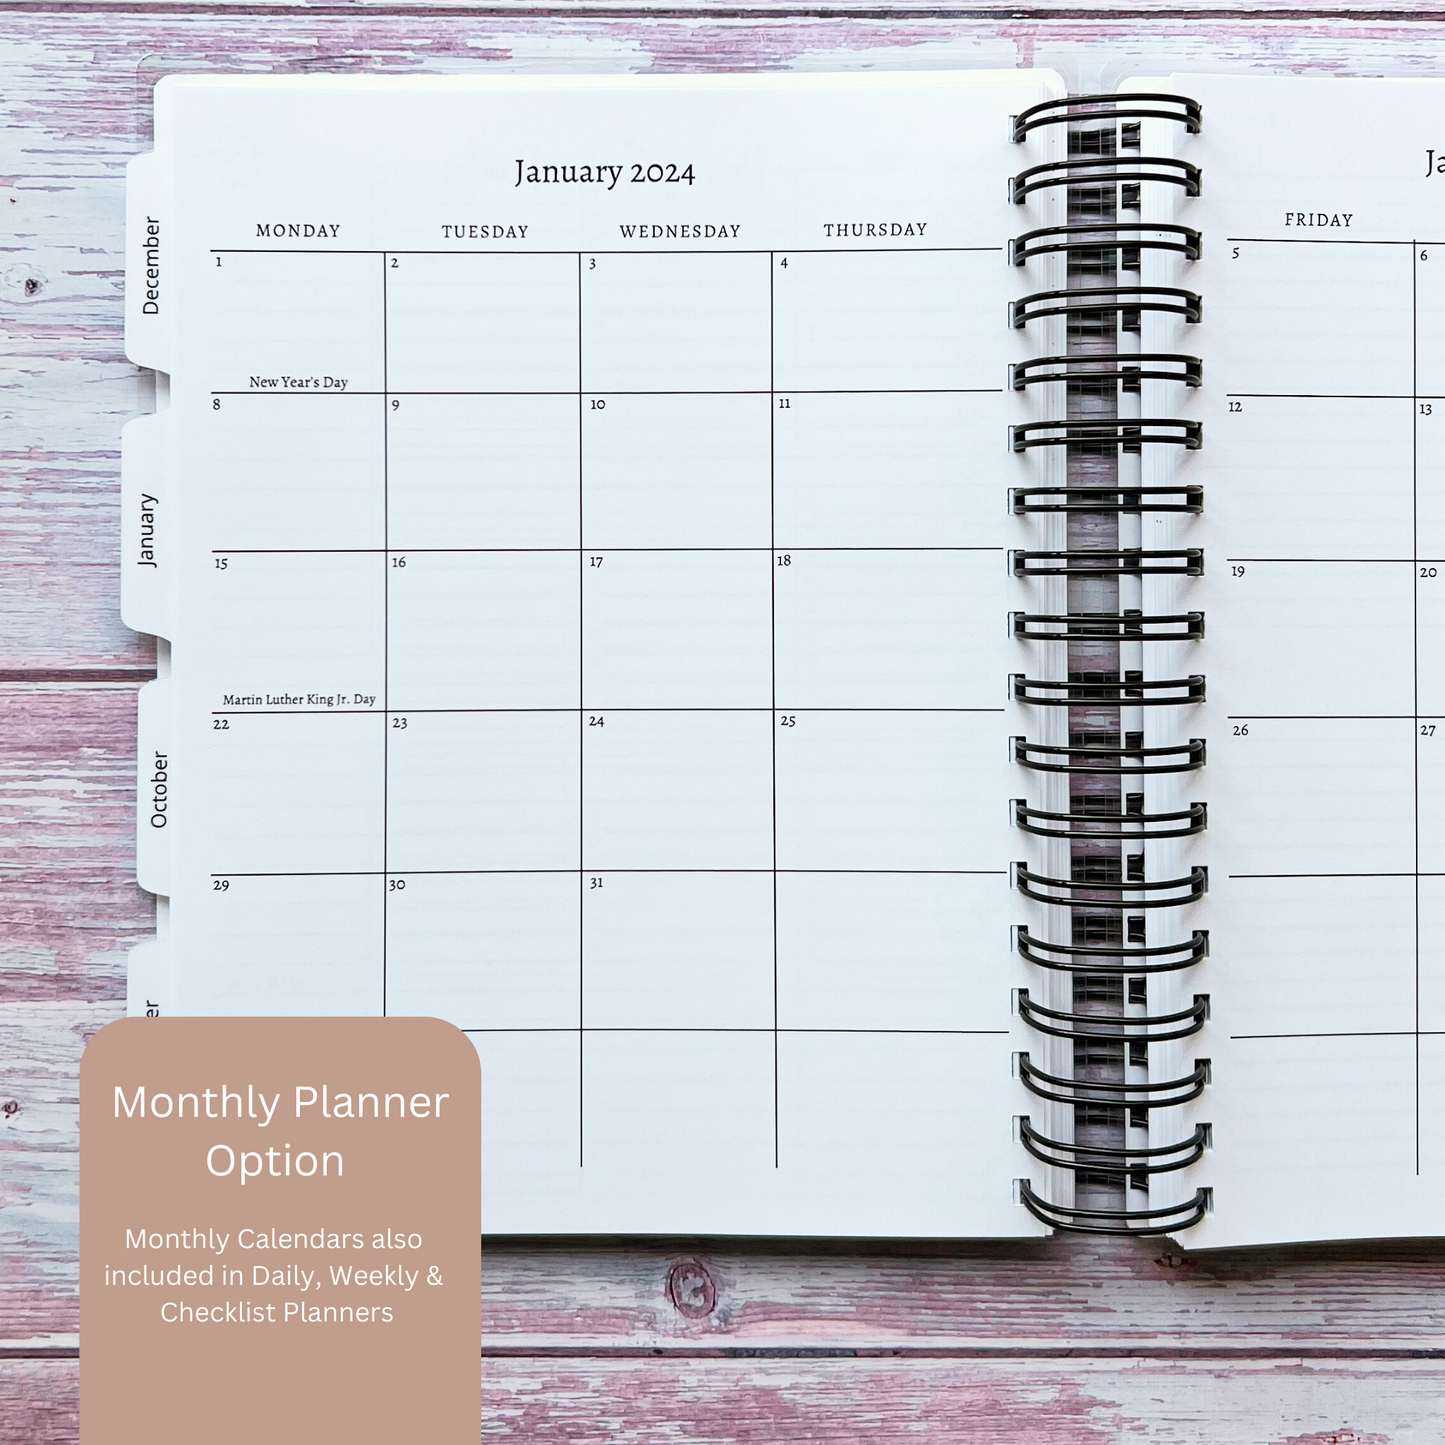 Personalized Monthly Planner - Relax Refresh Renew